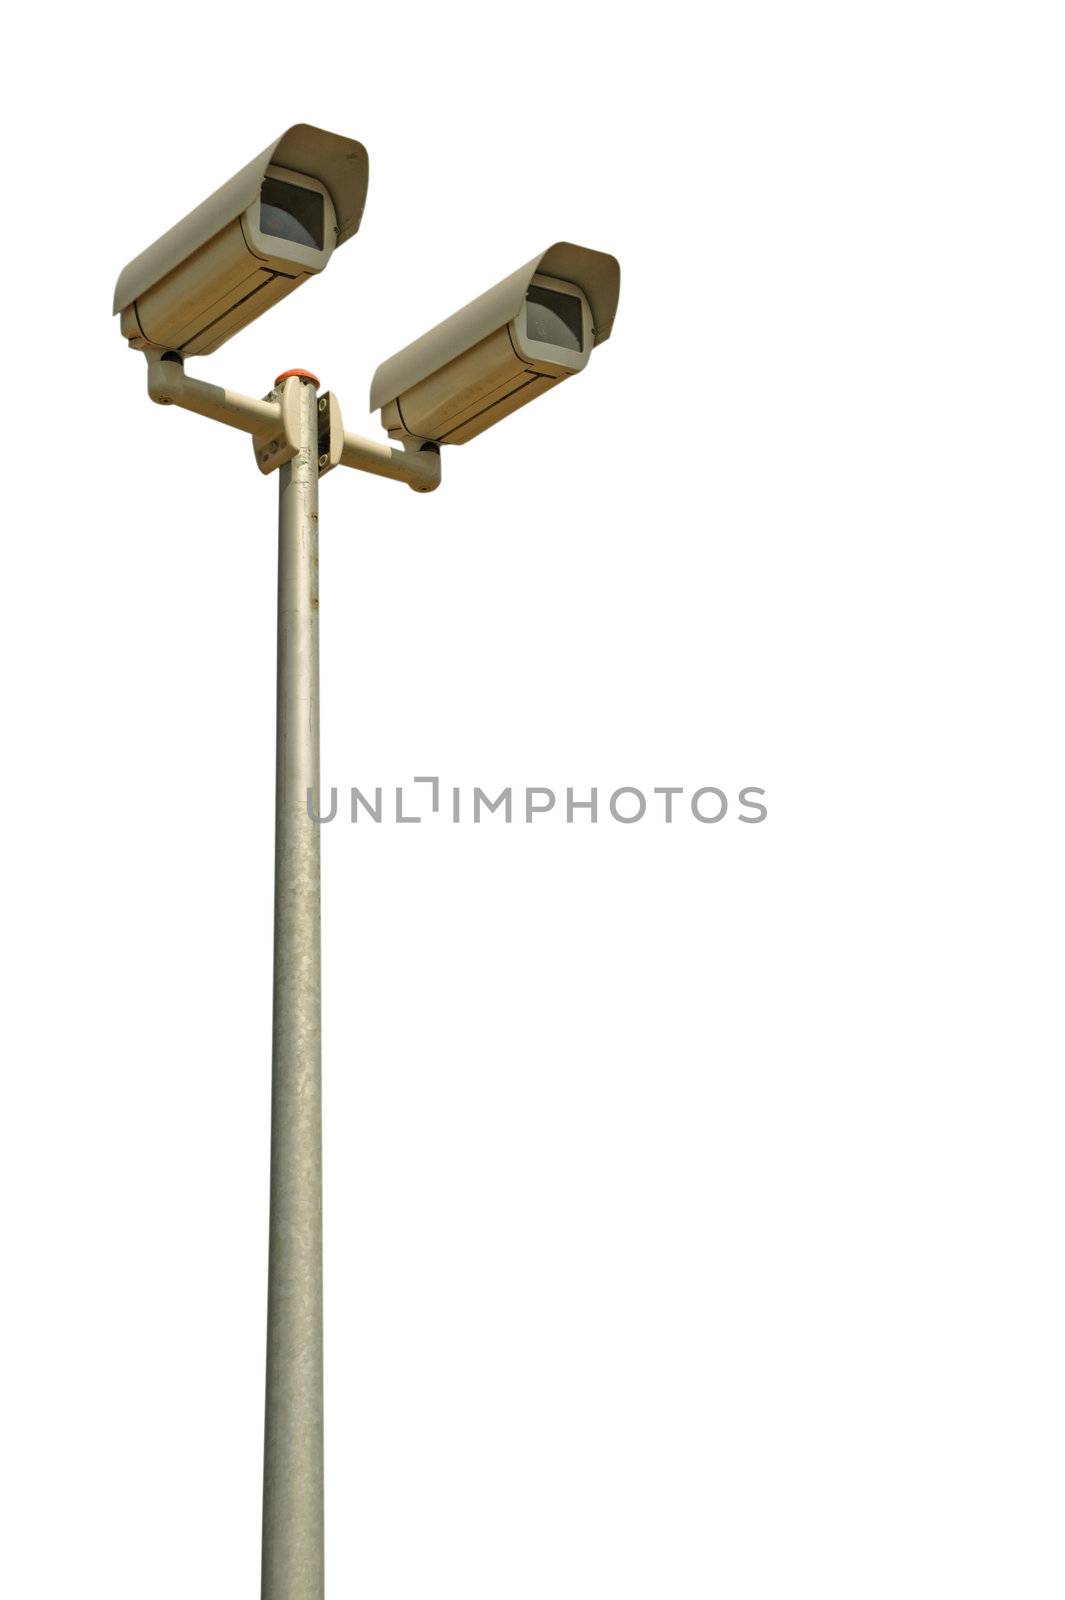 two video surveillance cameras on a pole (isolated on white background)